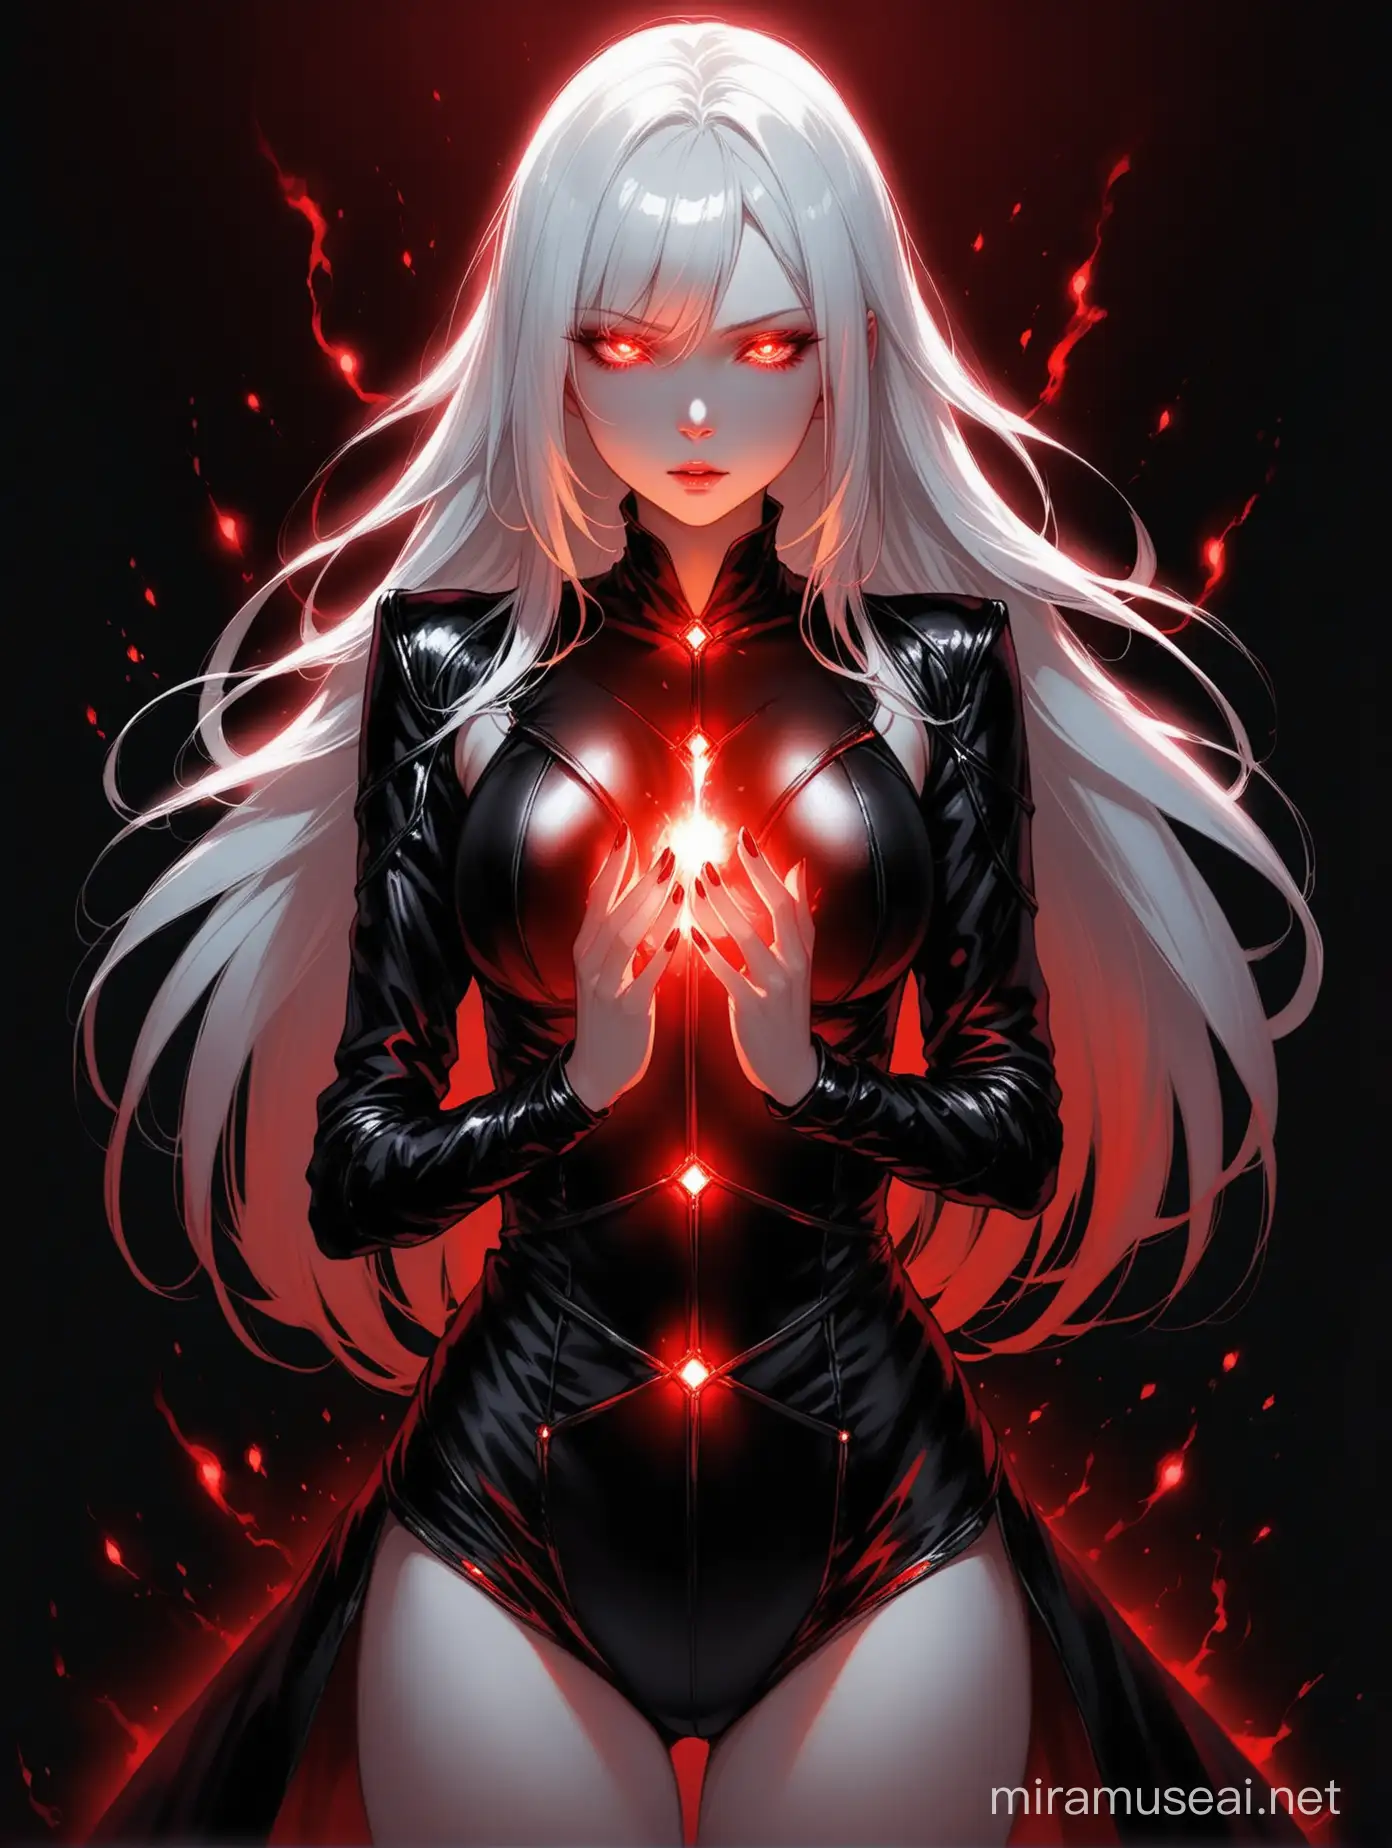 A beautiful pale skin lady with white hair, red glowing eyes and a black sexy leather outfit, summoning red blowing glow from her hands, while standing in the darkness